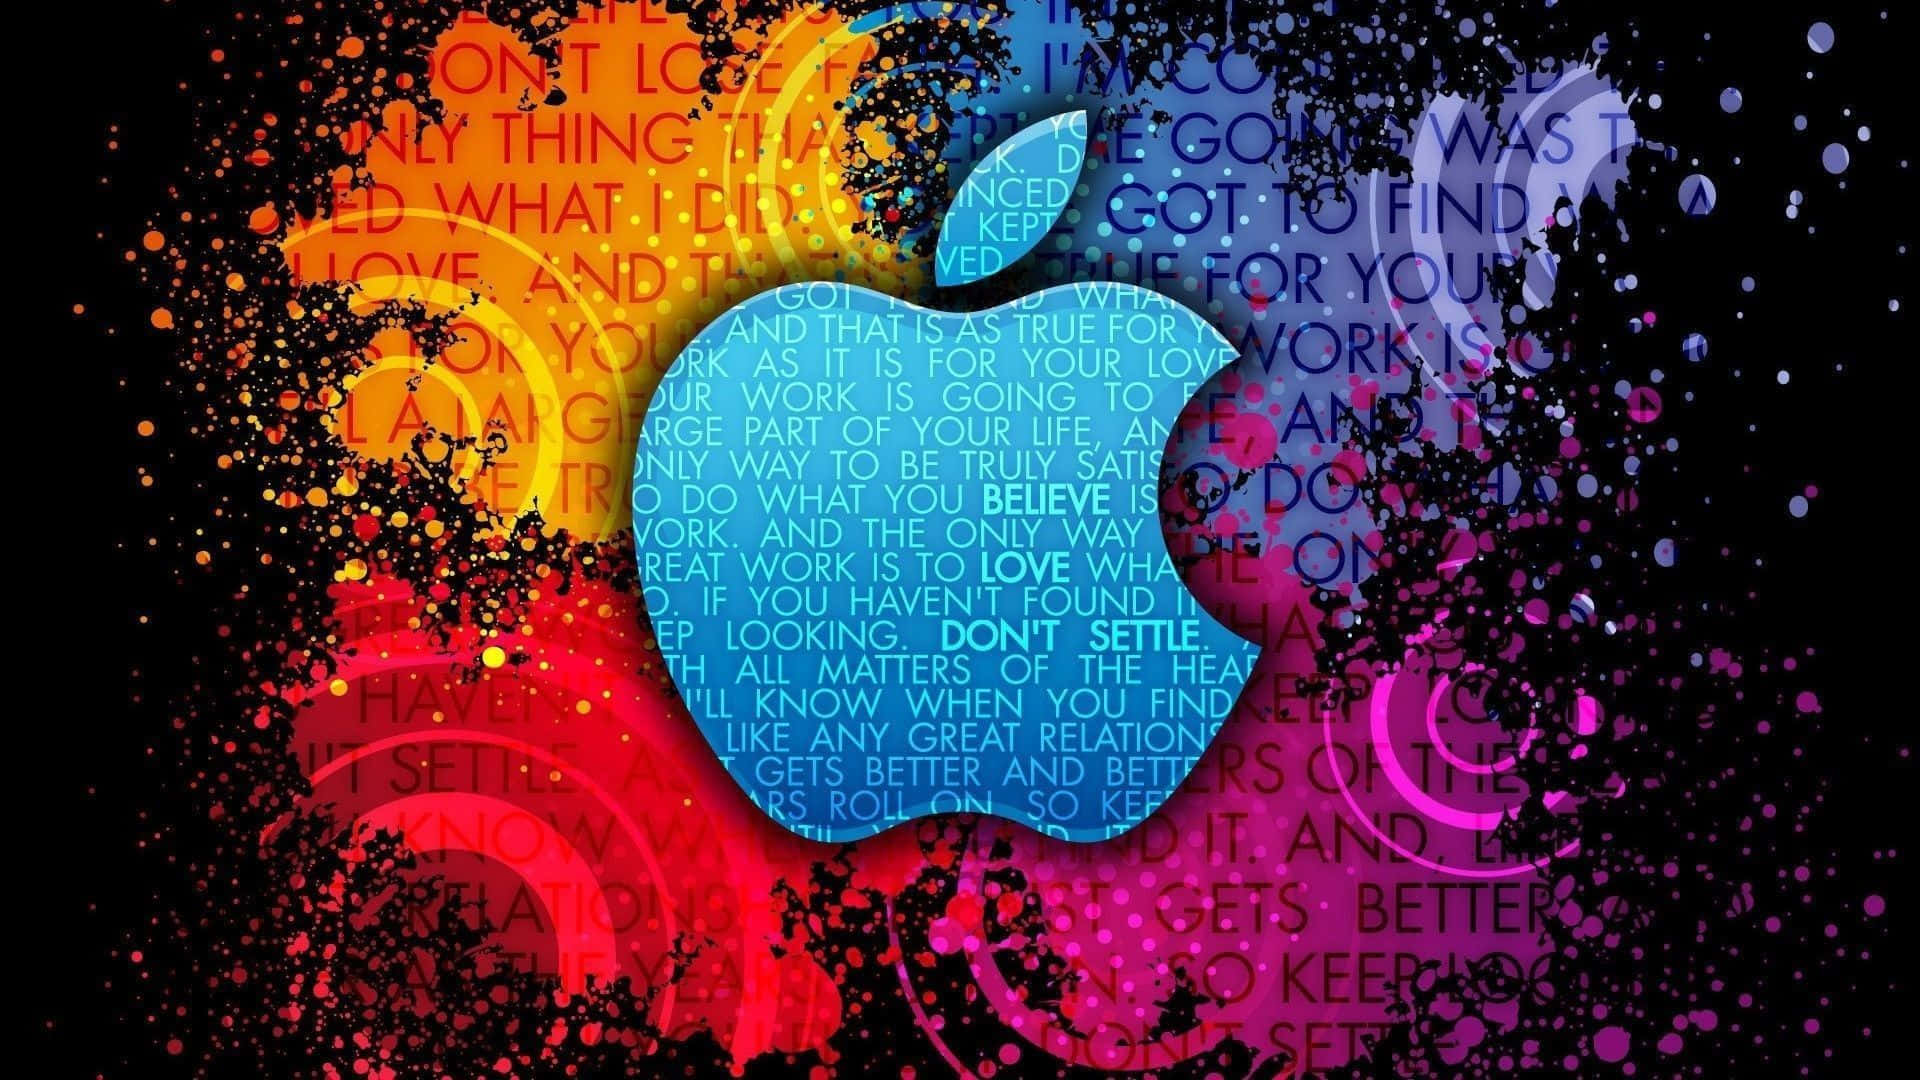 Apple Logo Wallpapers Hd Wallpapers Background